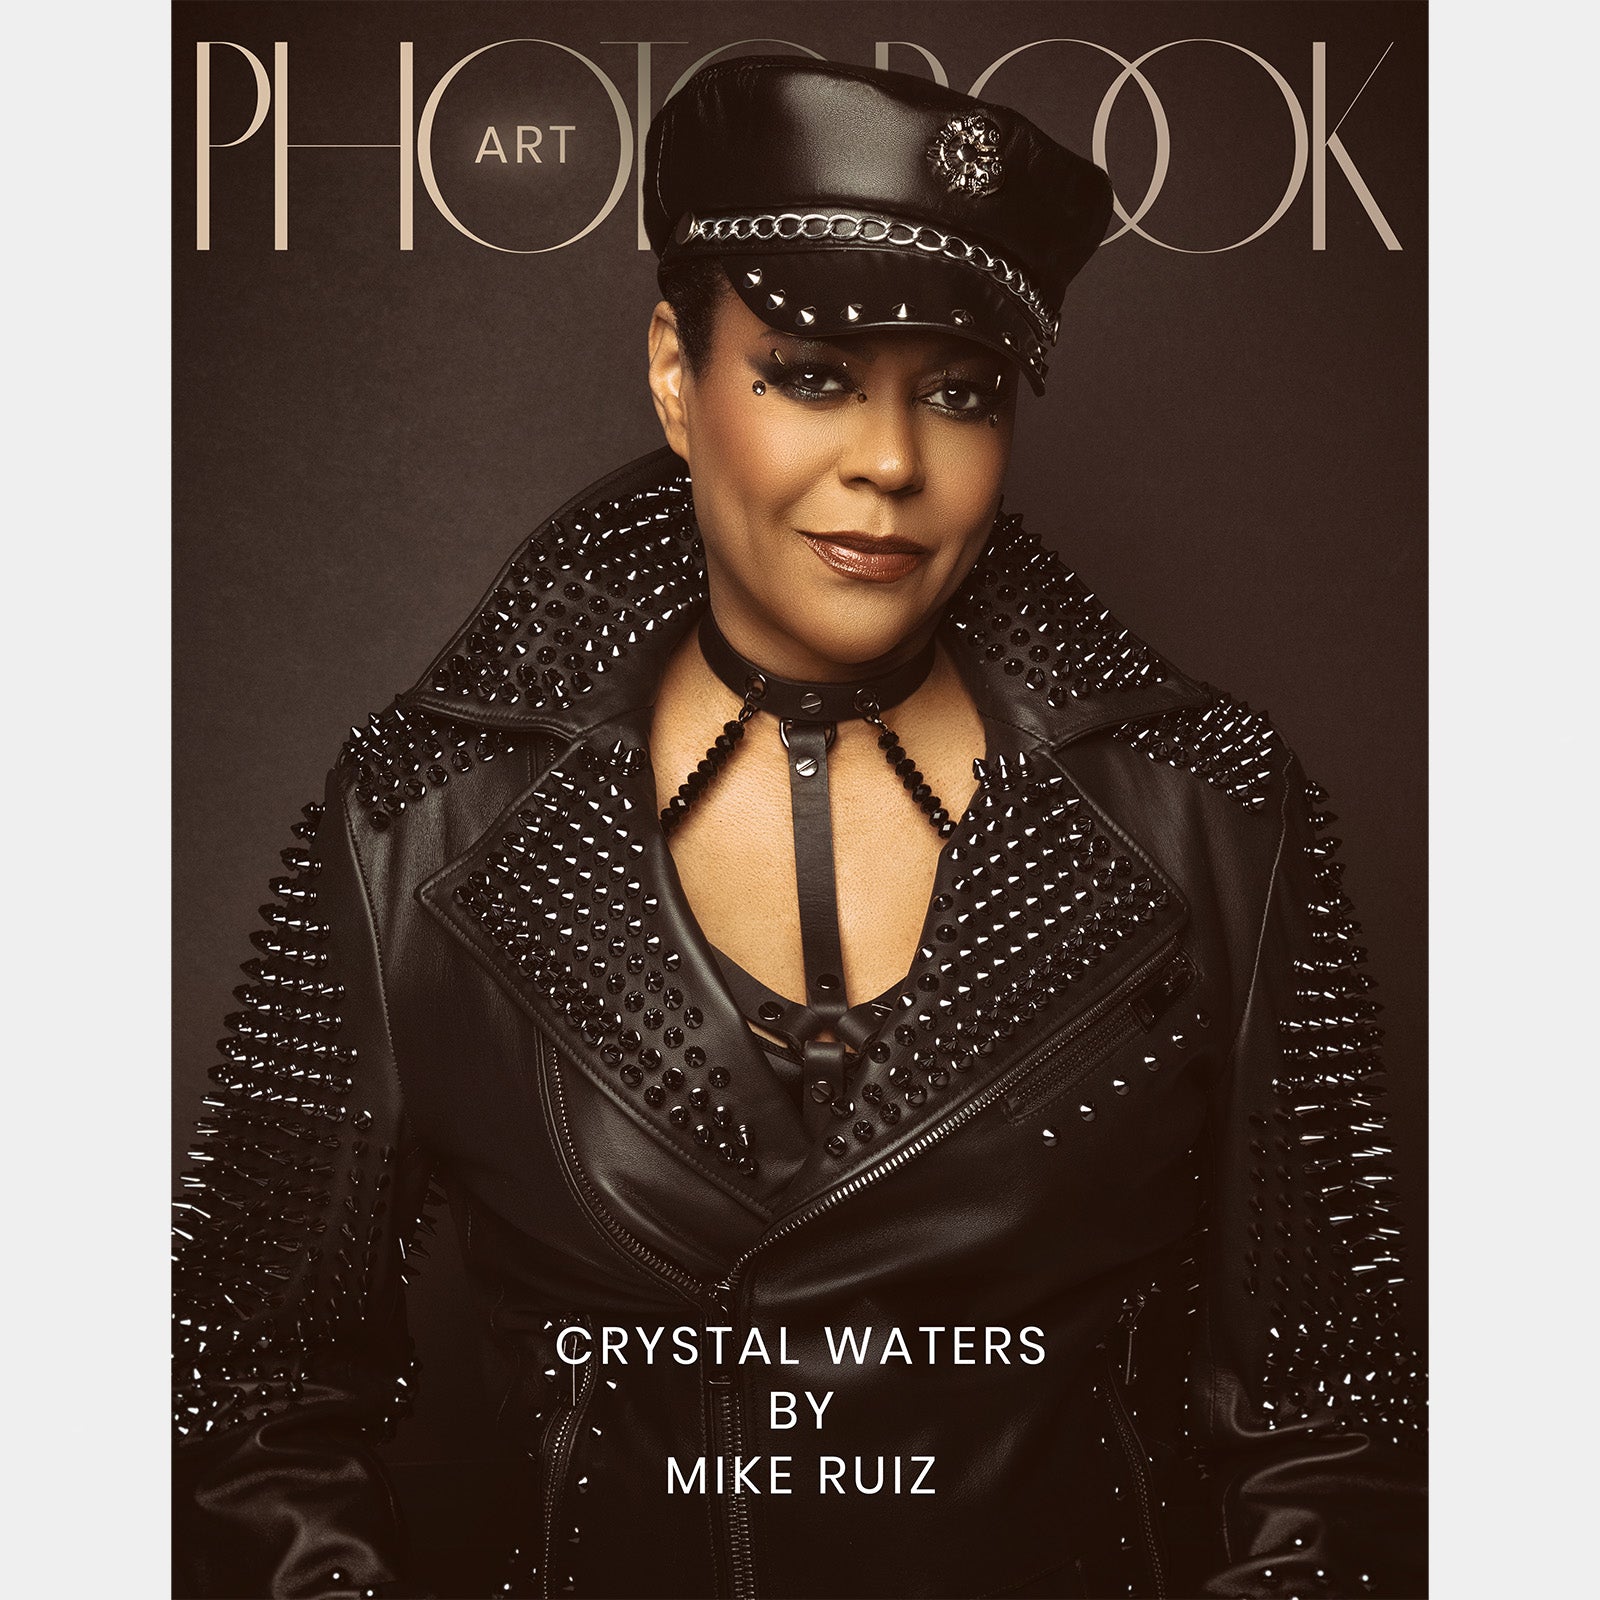 Crystal Waters for Photobook Magazine